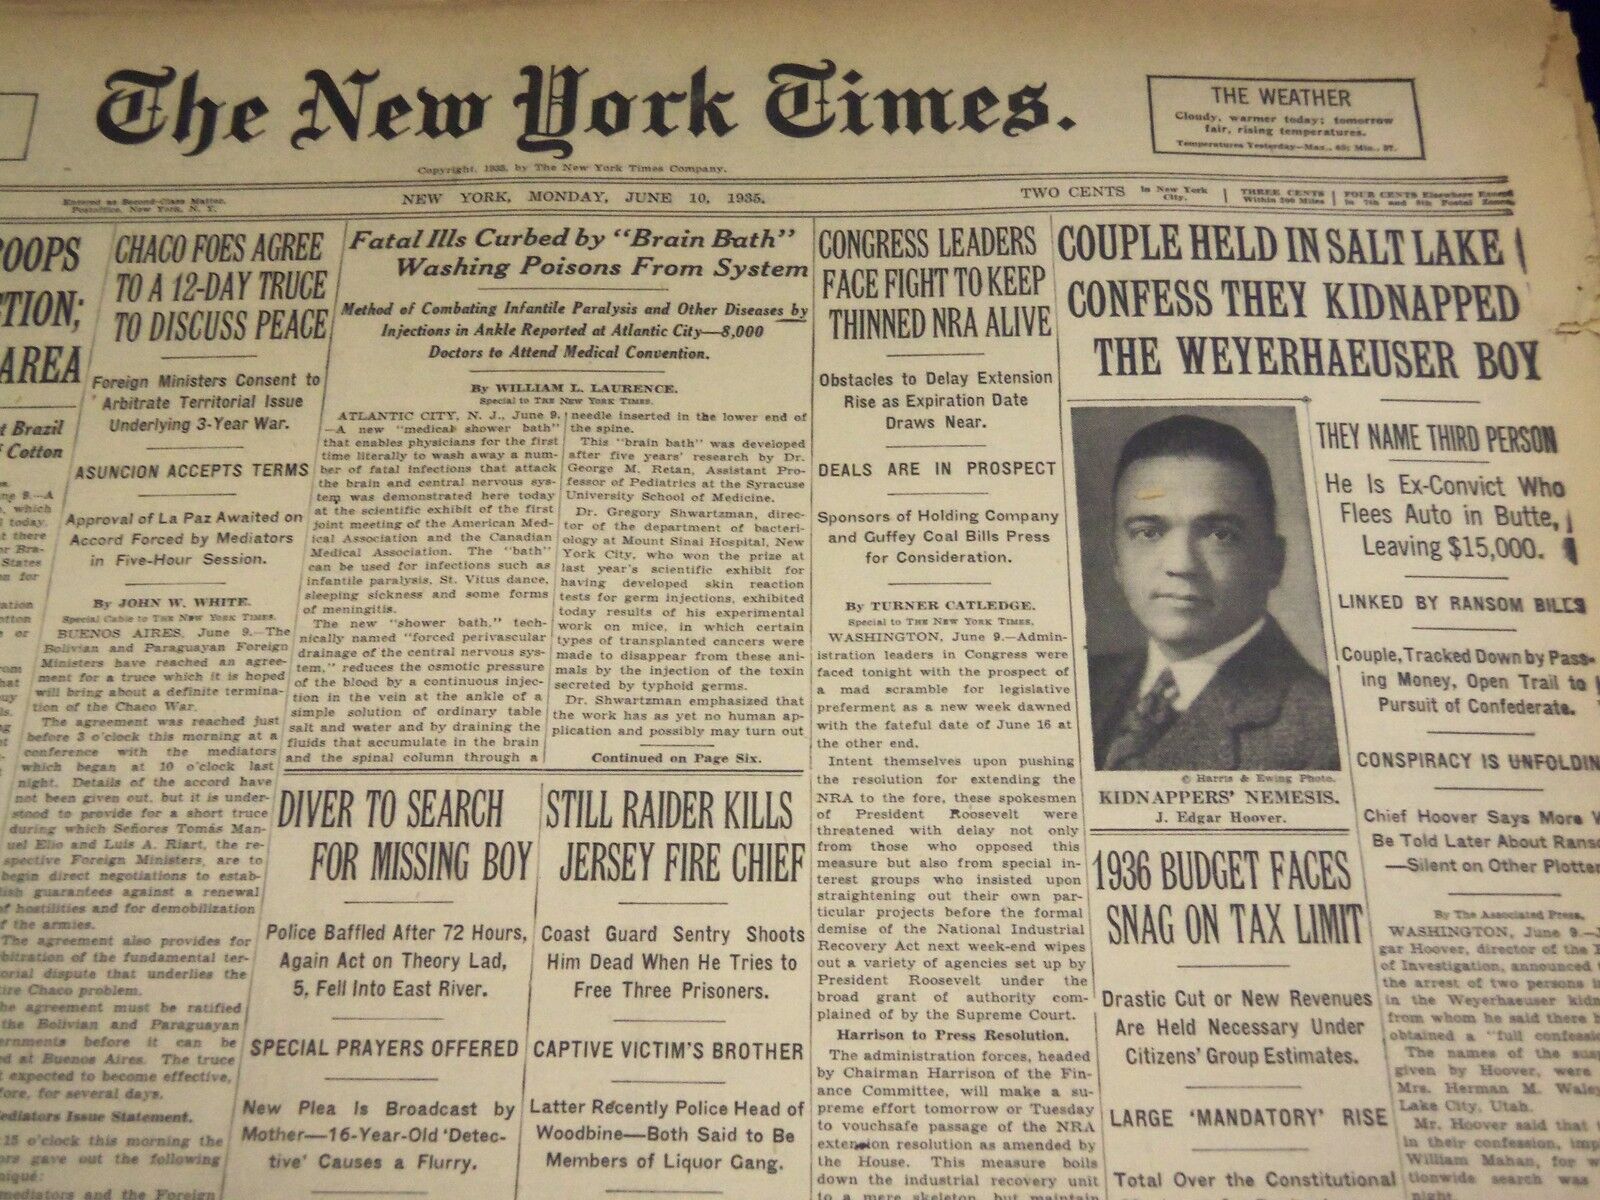 1935 JUNE 10 NEW YORK TIMES COUPLE CONFESS KIDNAPPING WEYERHAEUSER BOY - NT 1956